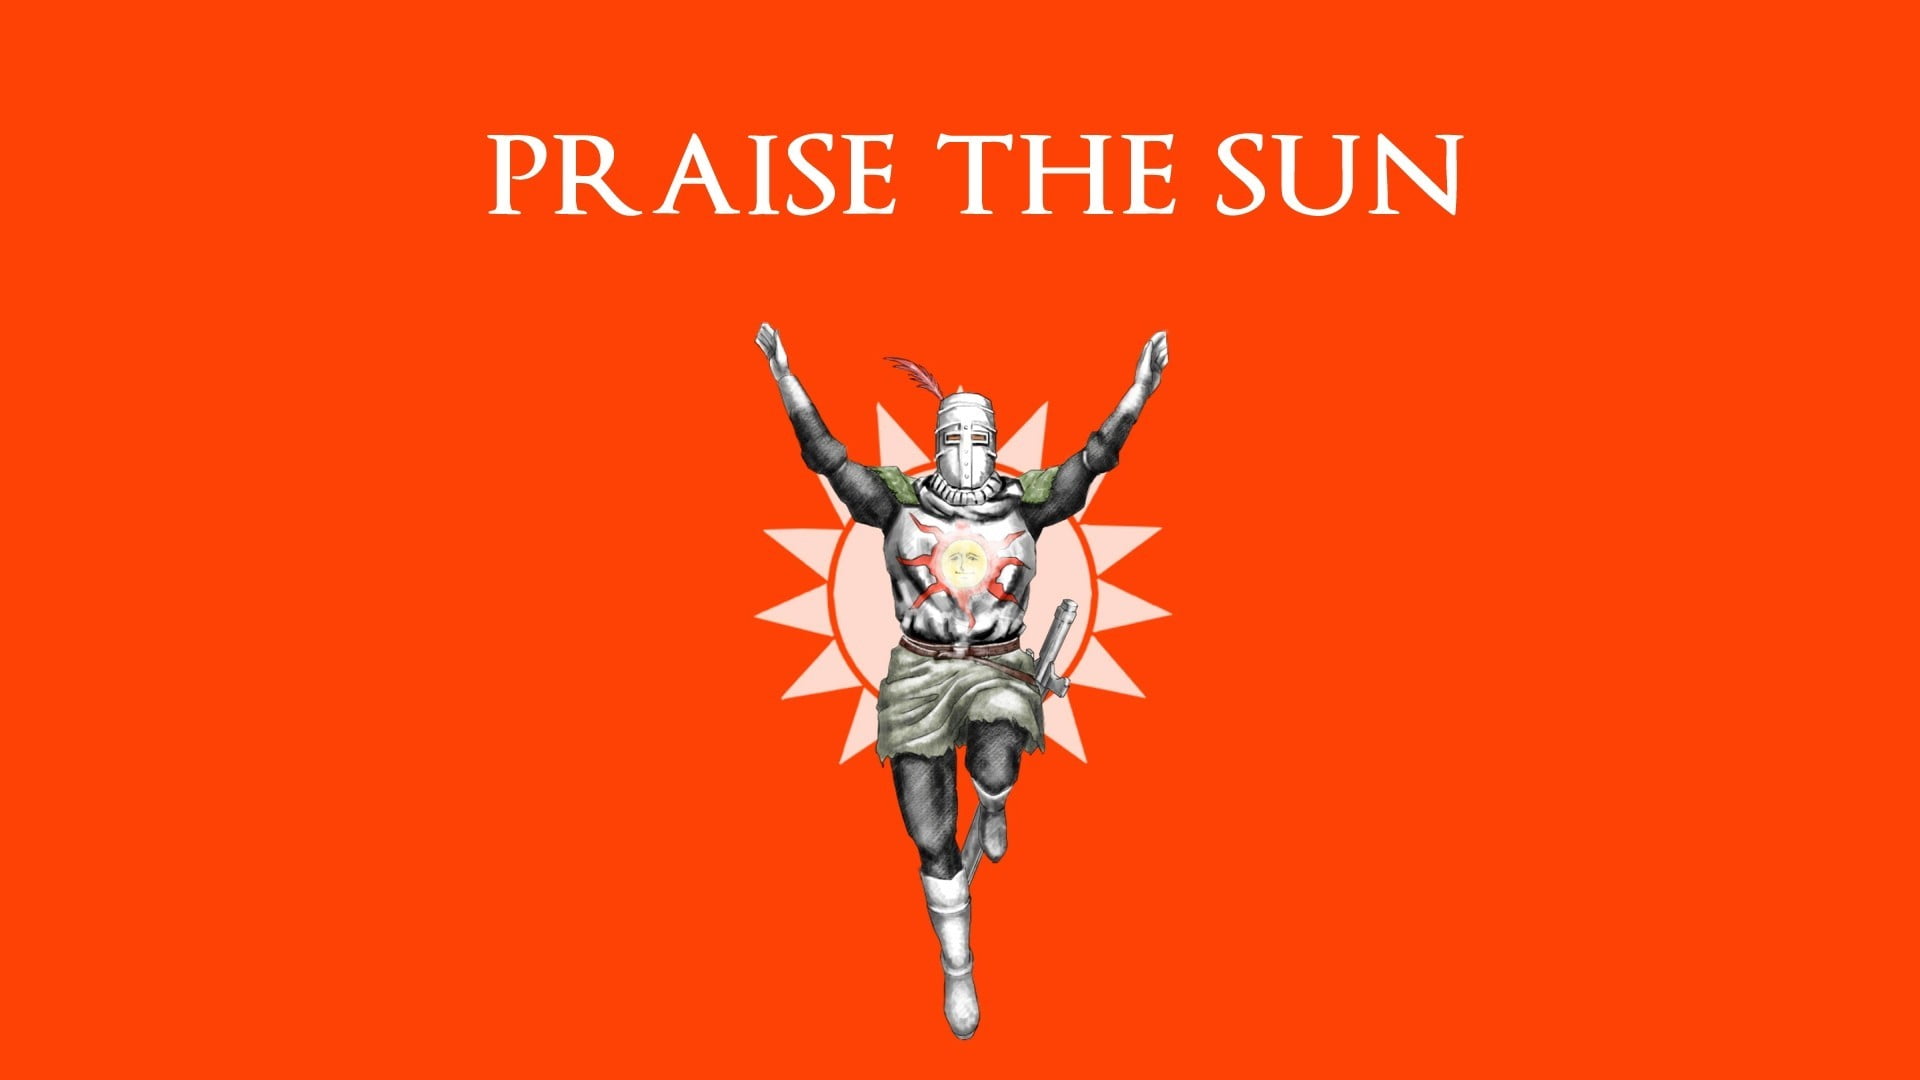 Praise The Sun Text On Red Background And Ninja Clipart Hd Wallpaper Wallpaper Flare